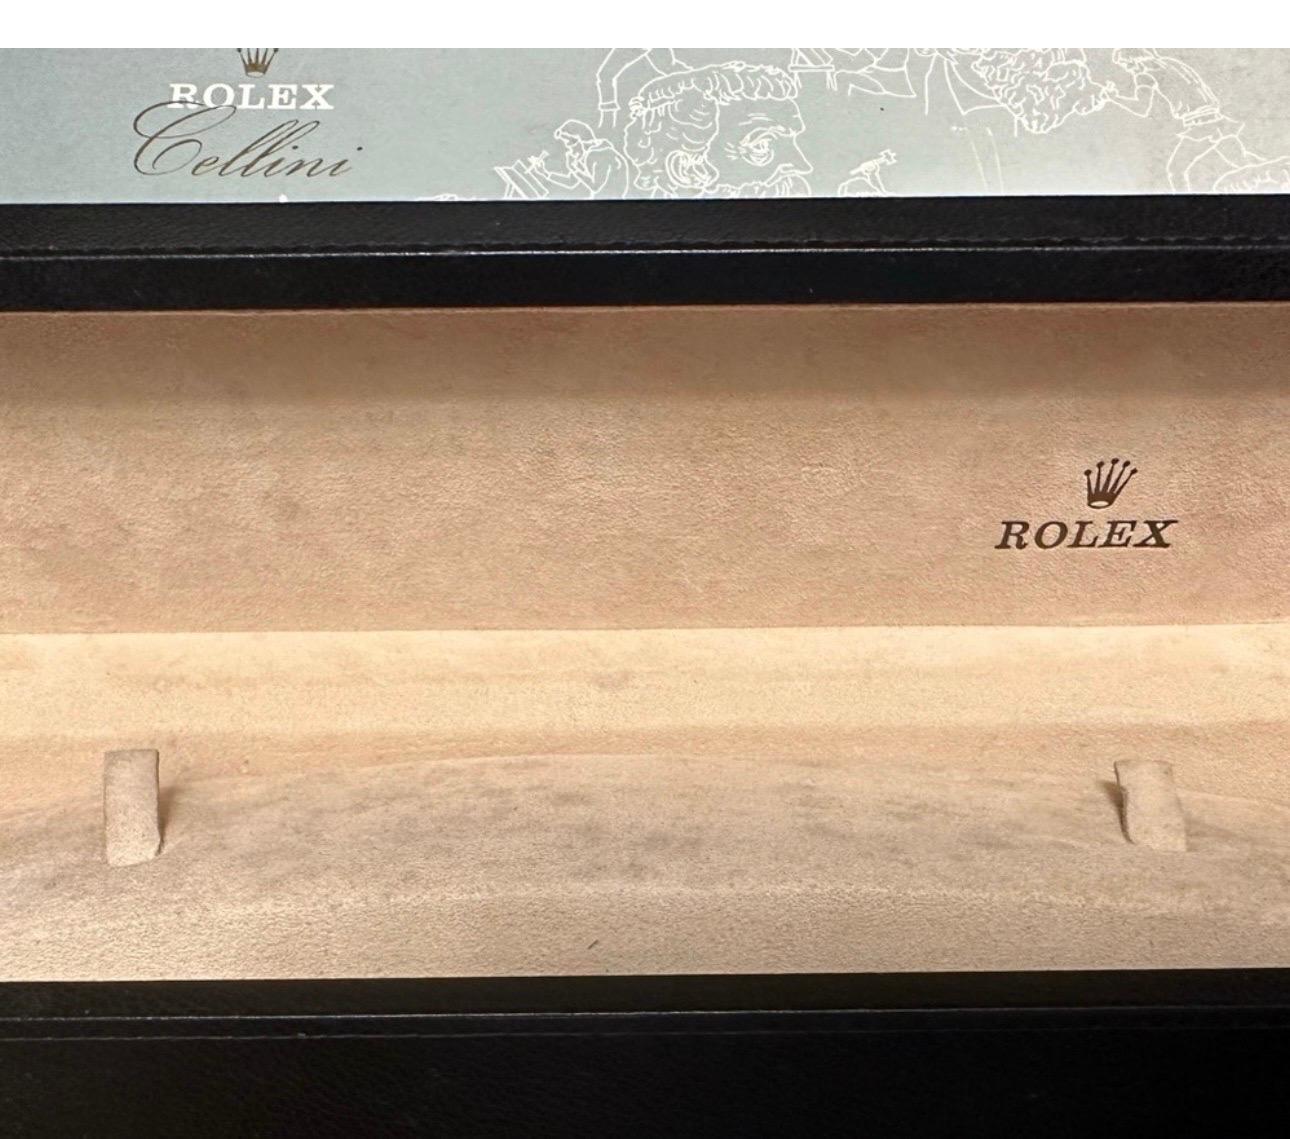 Rolex Cellini watch box complete with outer box. Black leather cream inside new For Sale 2